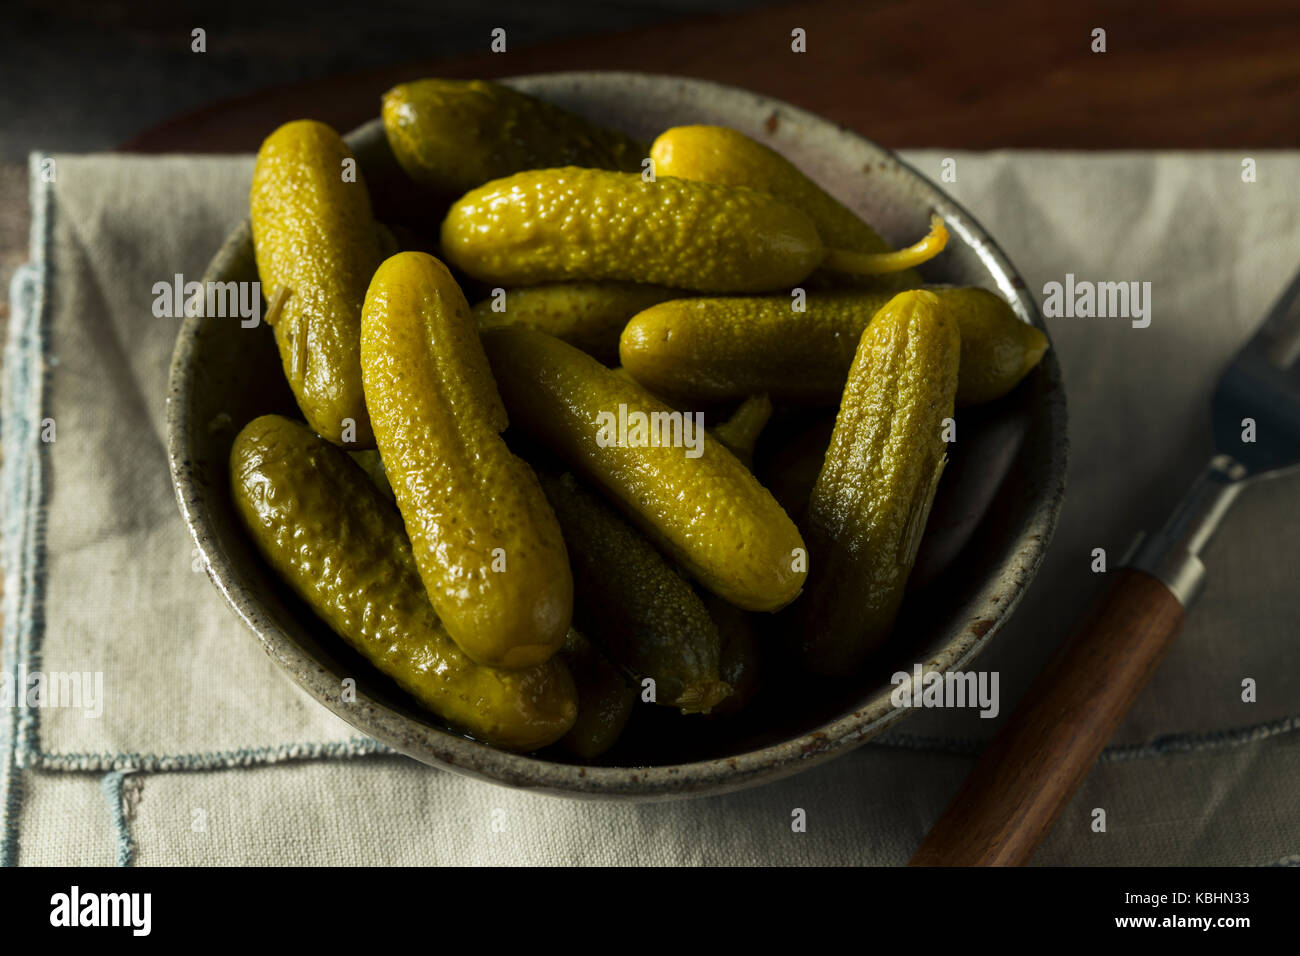 Pickled Organic Cornichon Gherkin Pickles with Dill and Spices Stock Photo